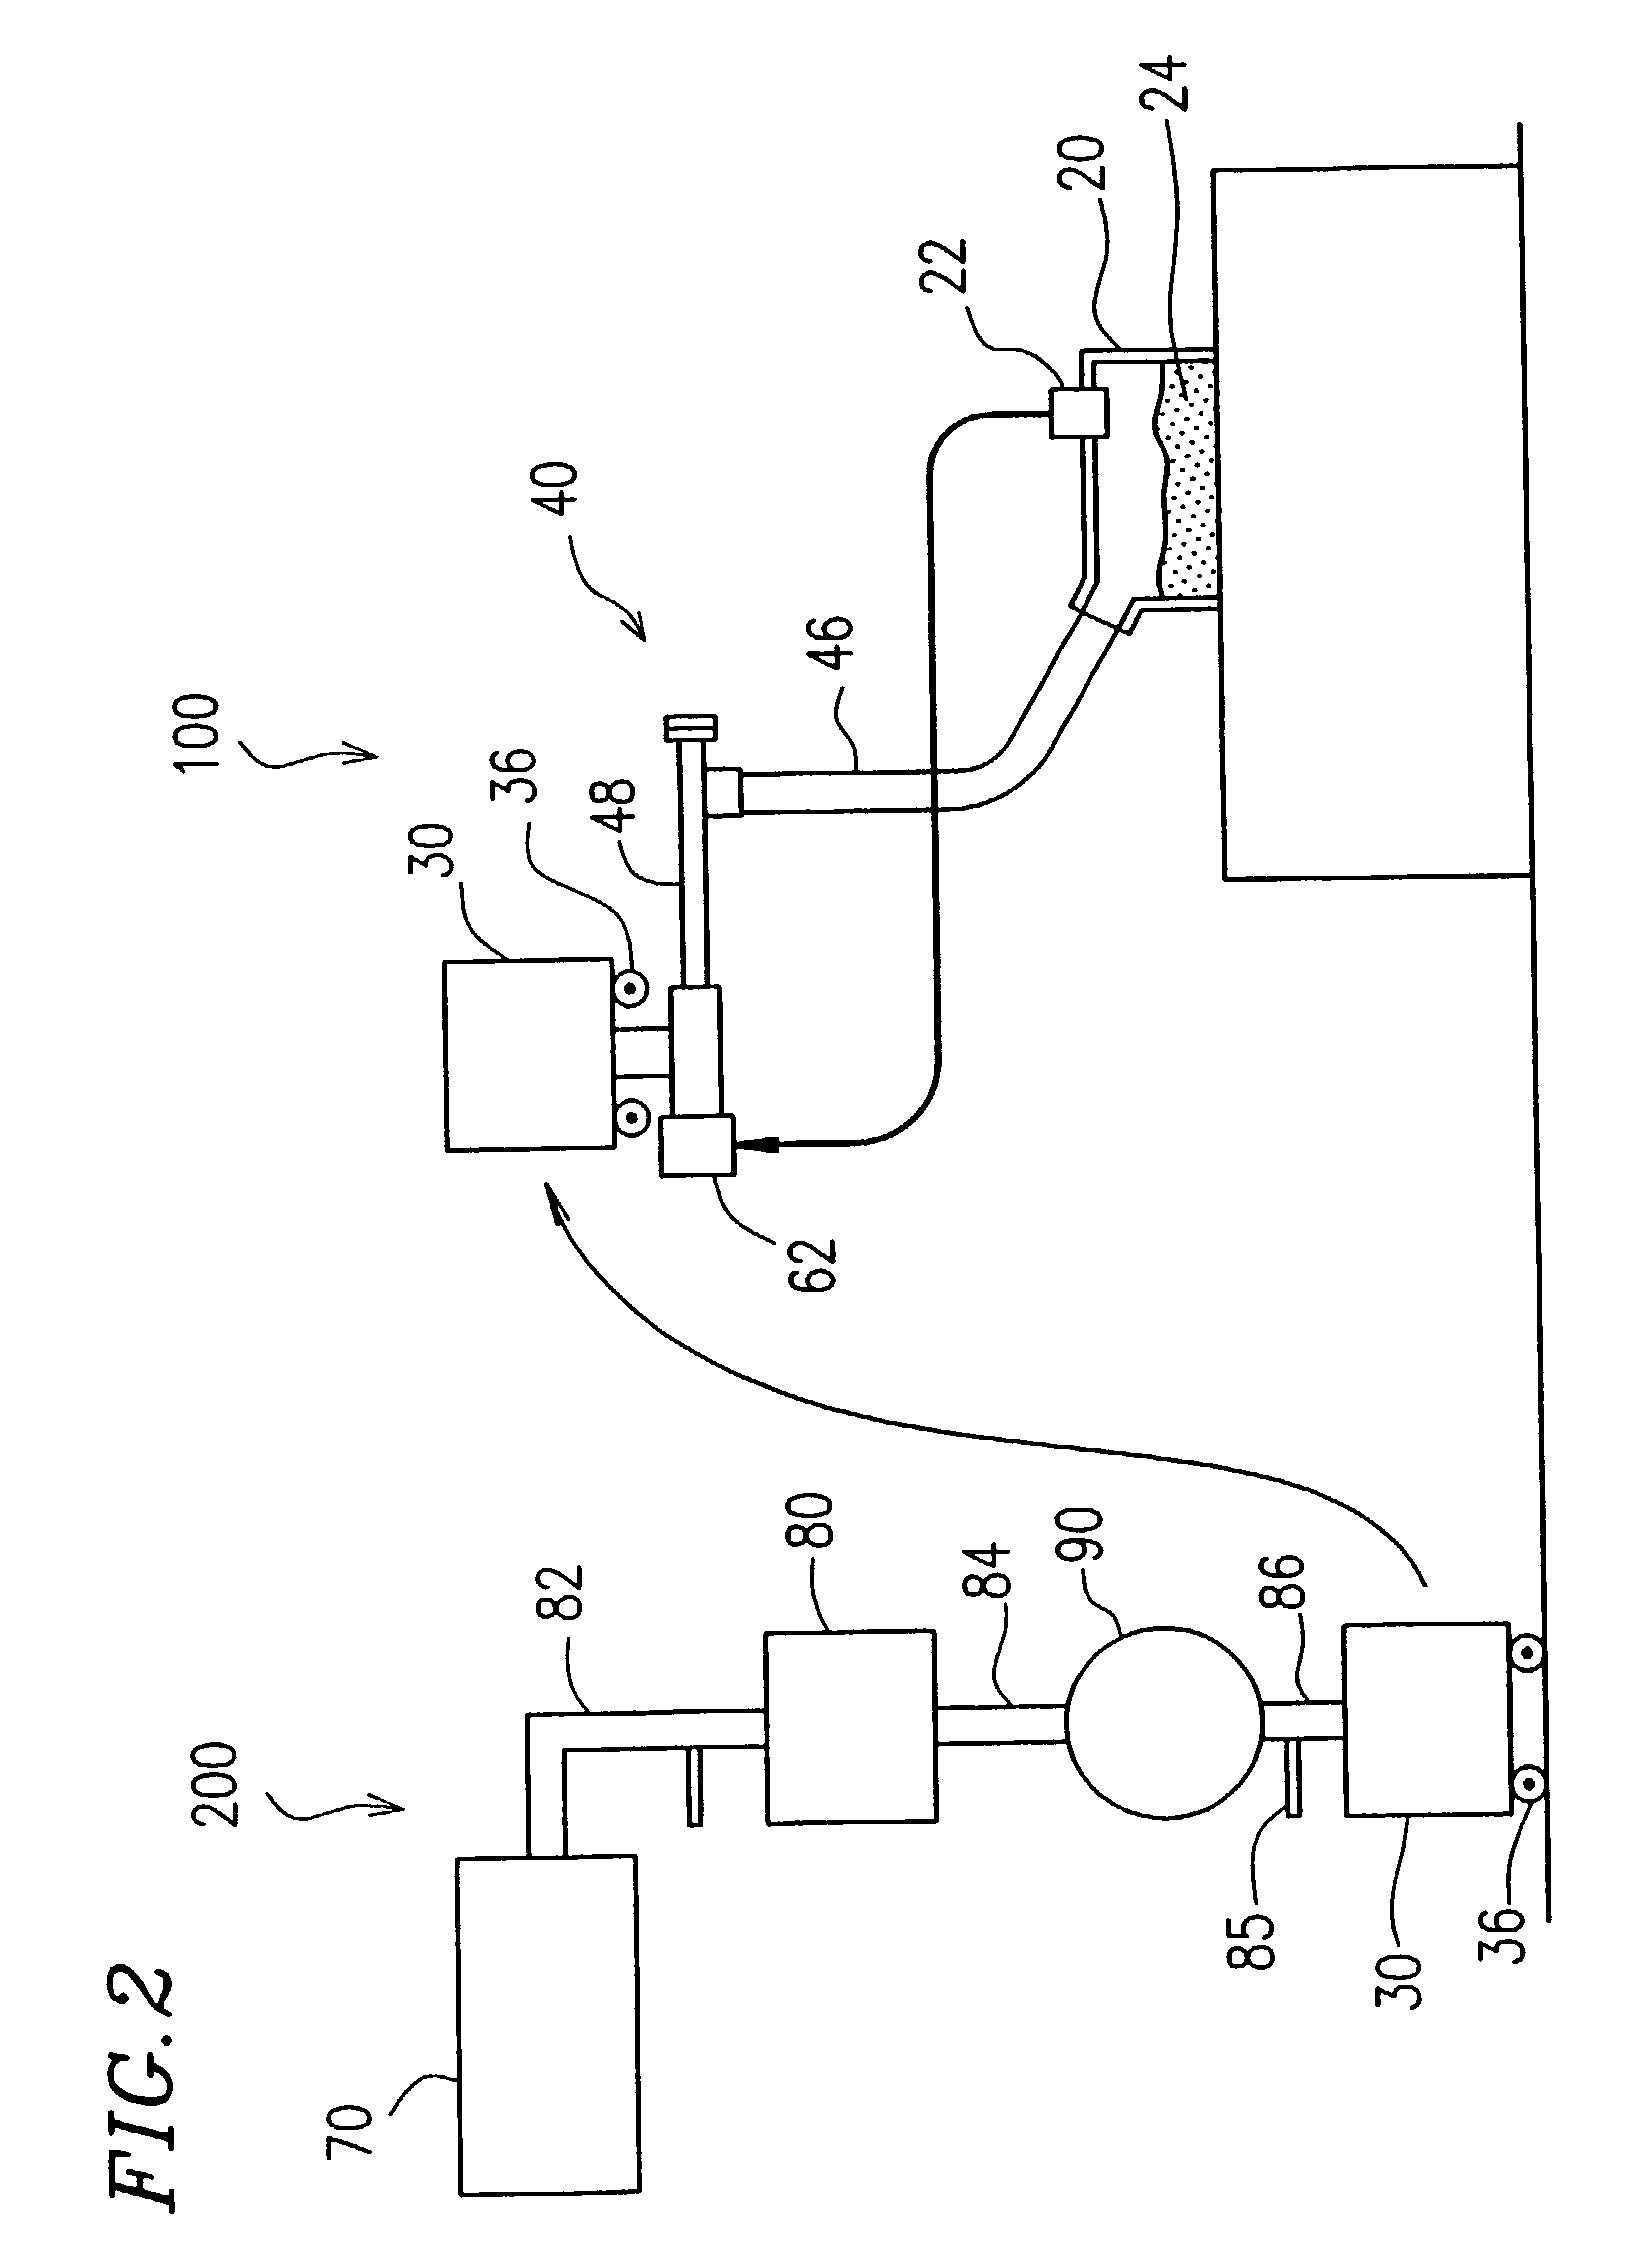 Powder compacting apparatus and method of producing a rare-earth magnet using the same